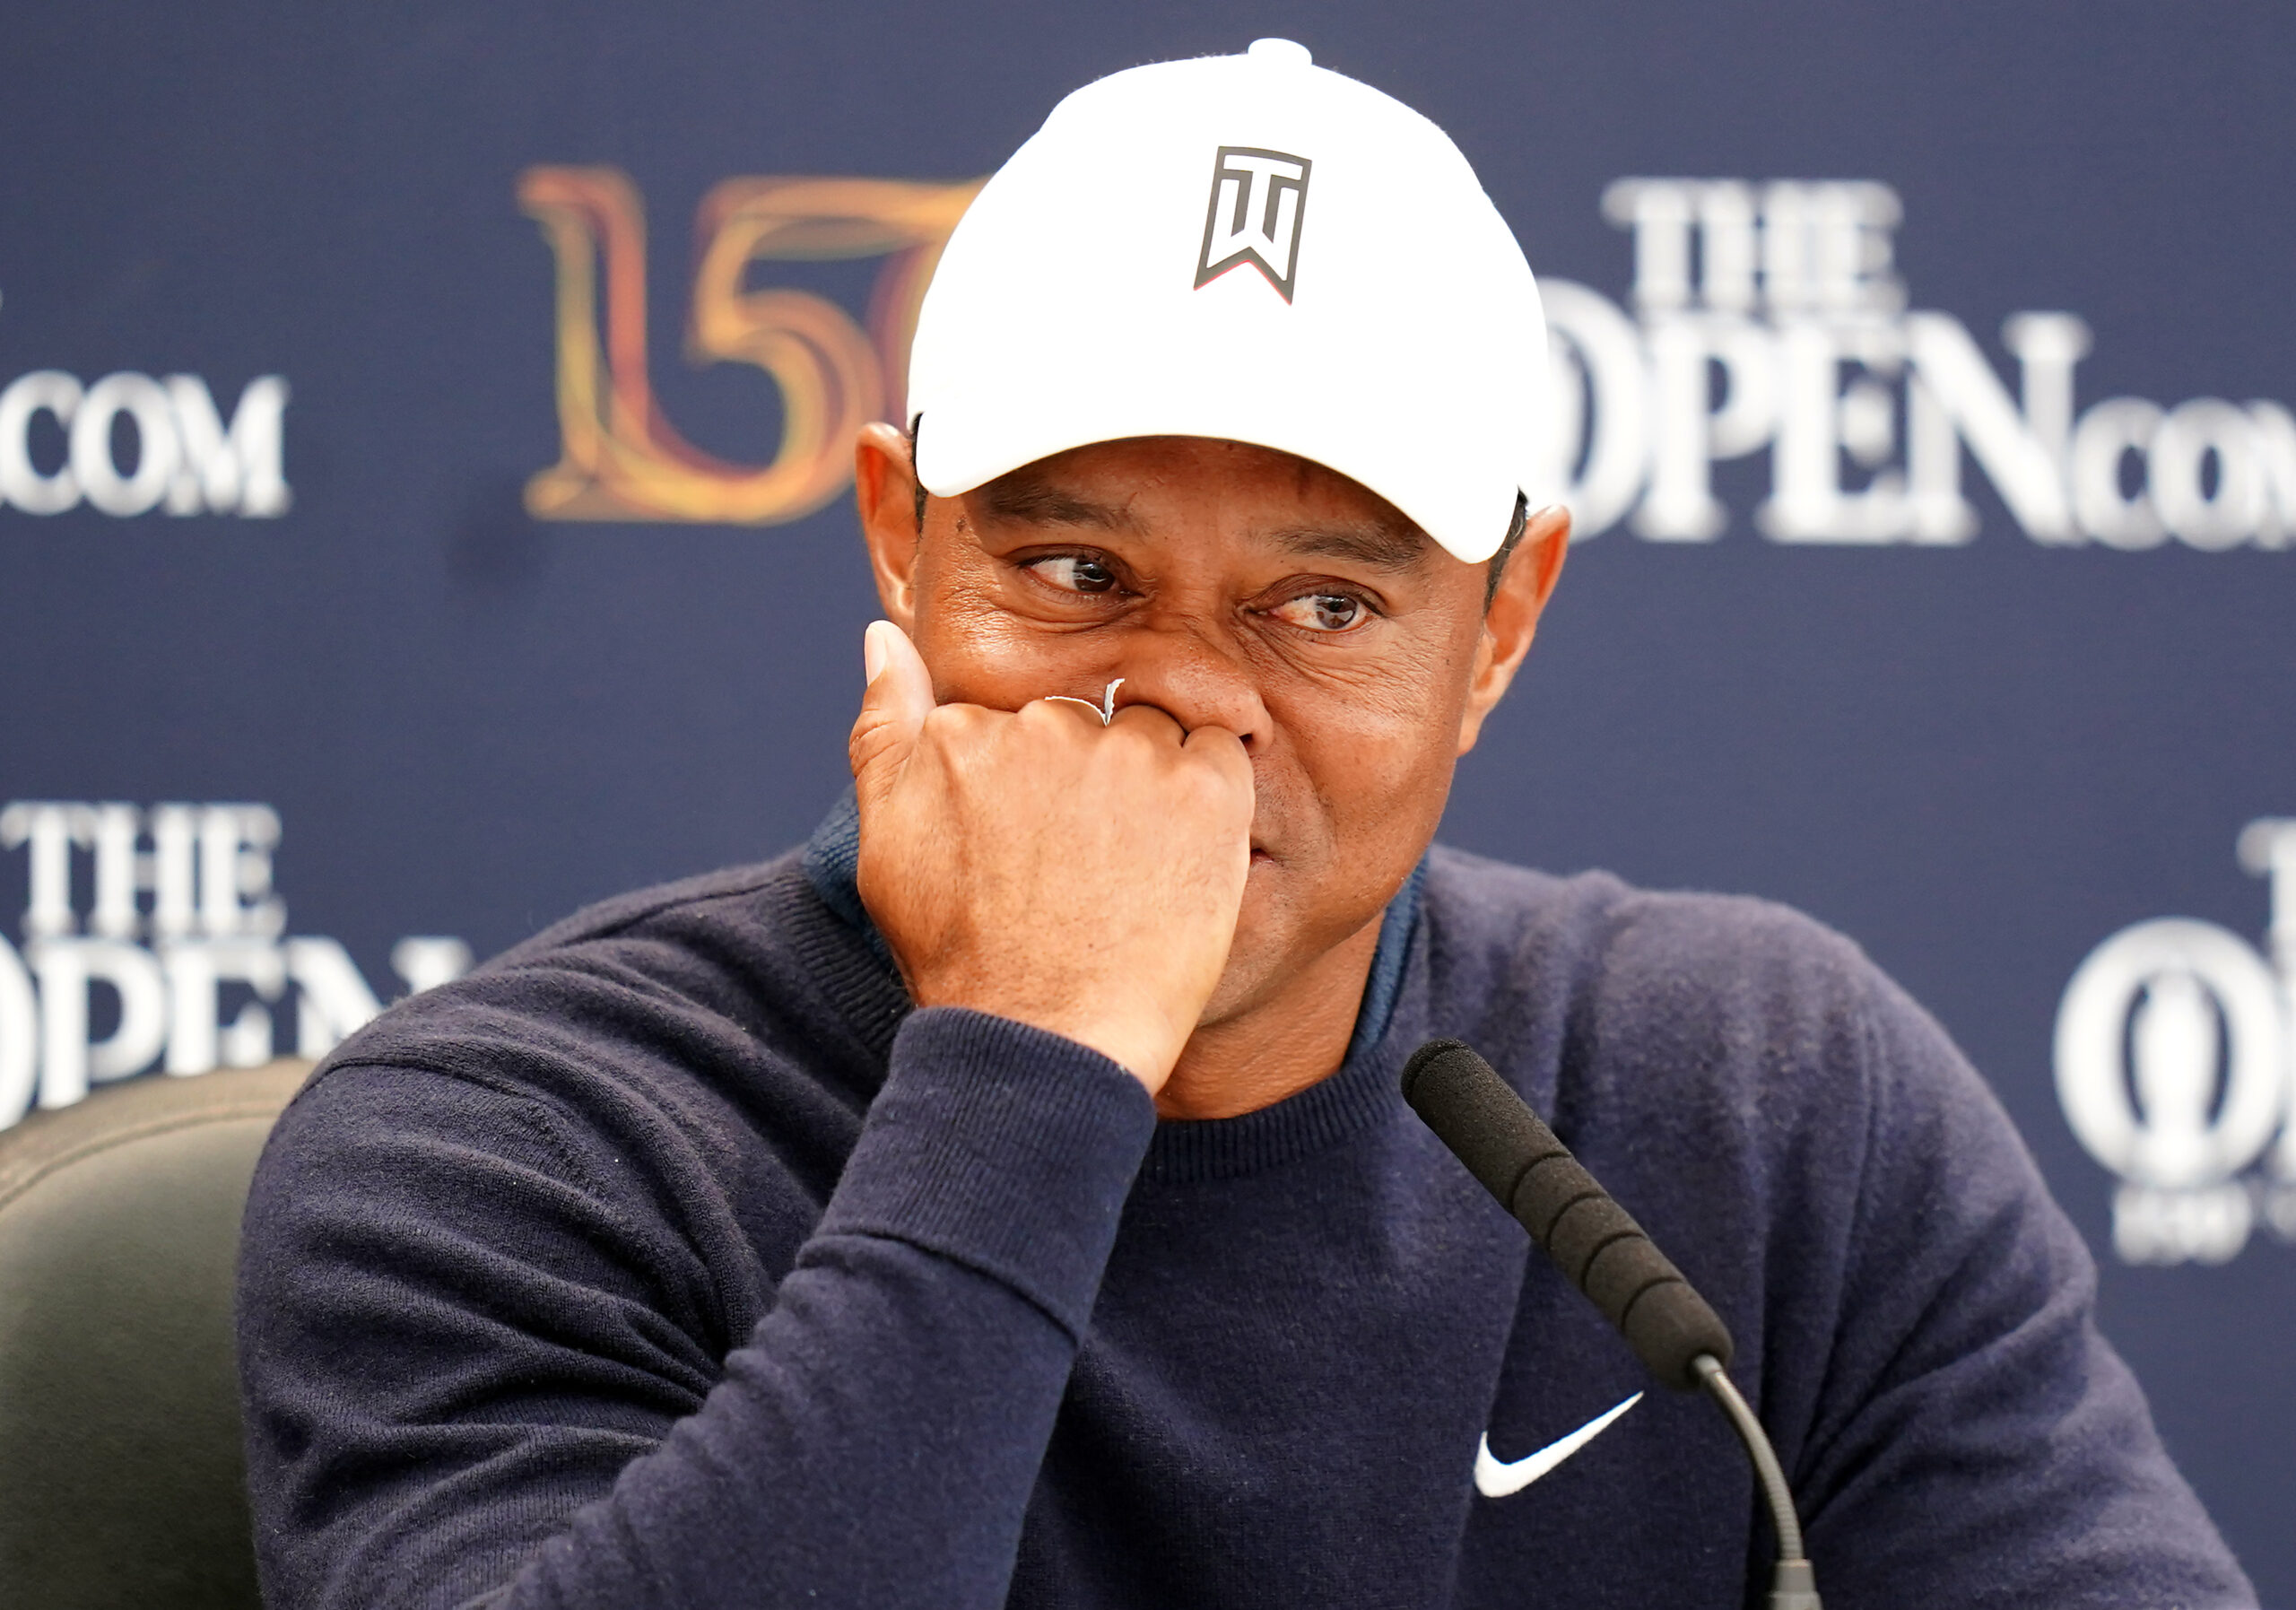 Tiger Woods returned to golf after a life-threatening car crash.